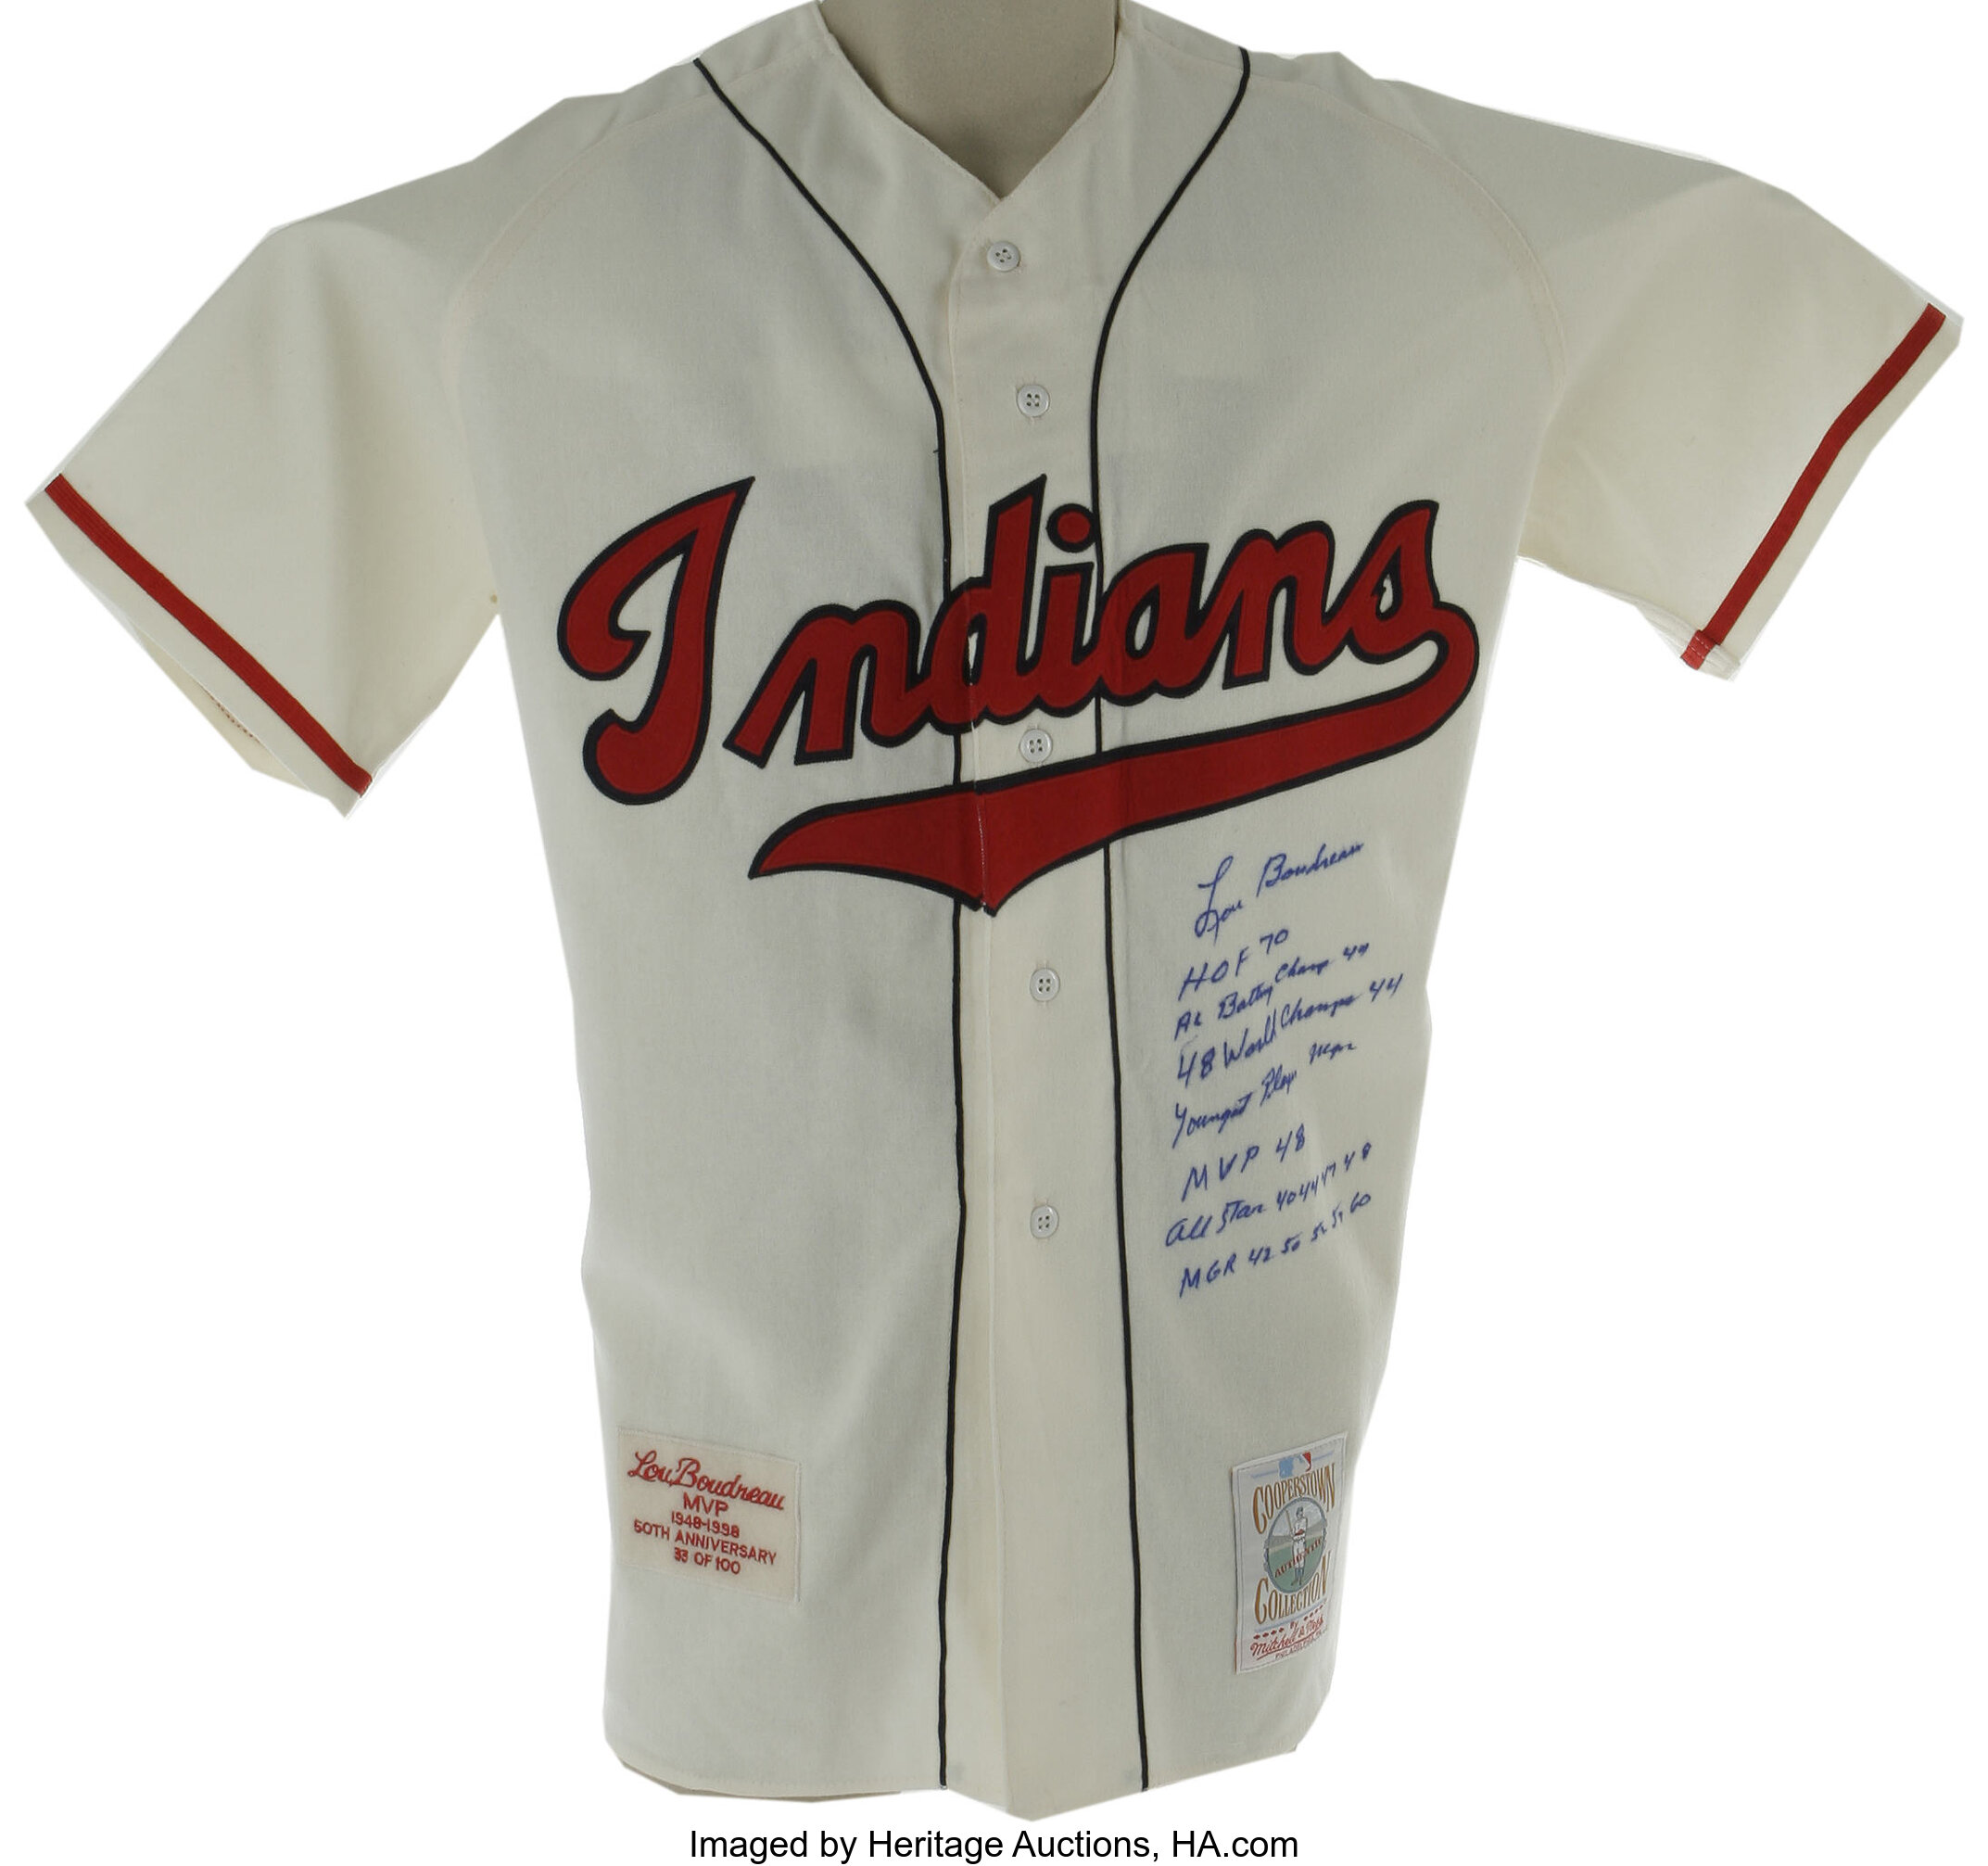 Lou Boudreau Signed Throwback Stat Jersey. One of the finest